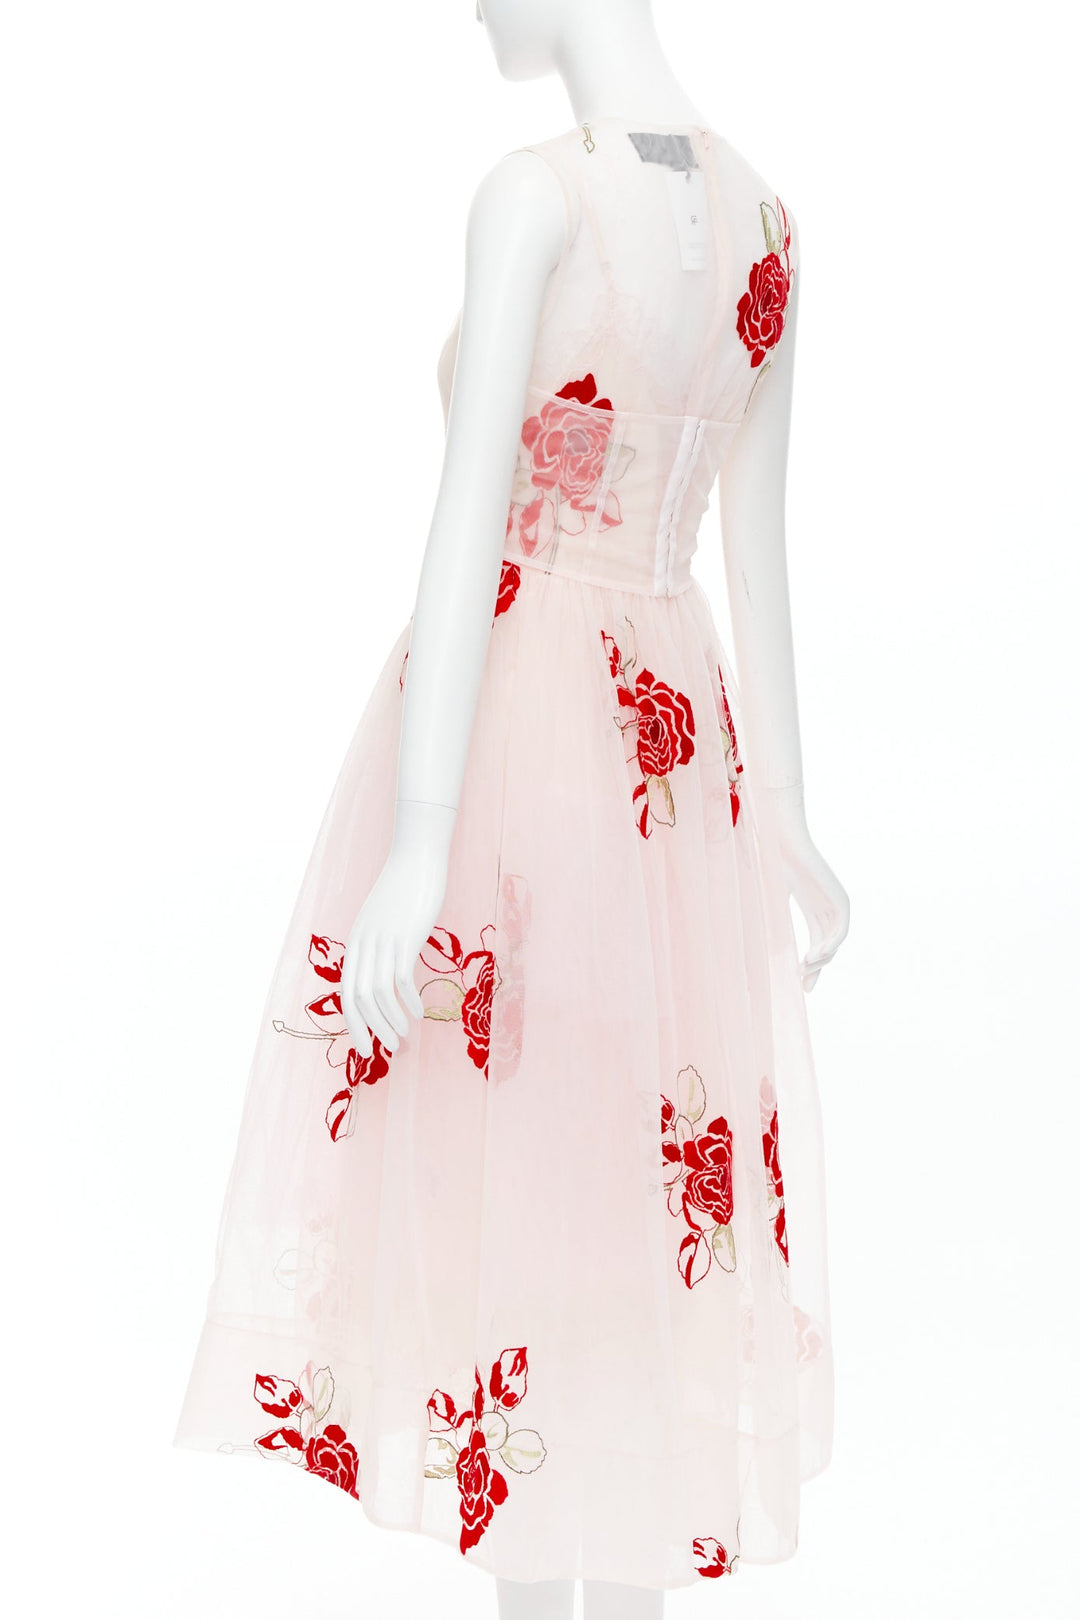 SIMONE ROCHA 2020 Runway  pink red rose floral embroidery tulle dress UK8 S